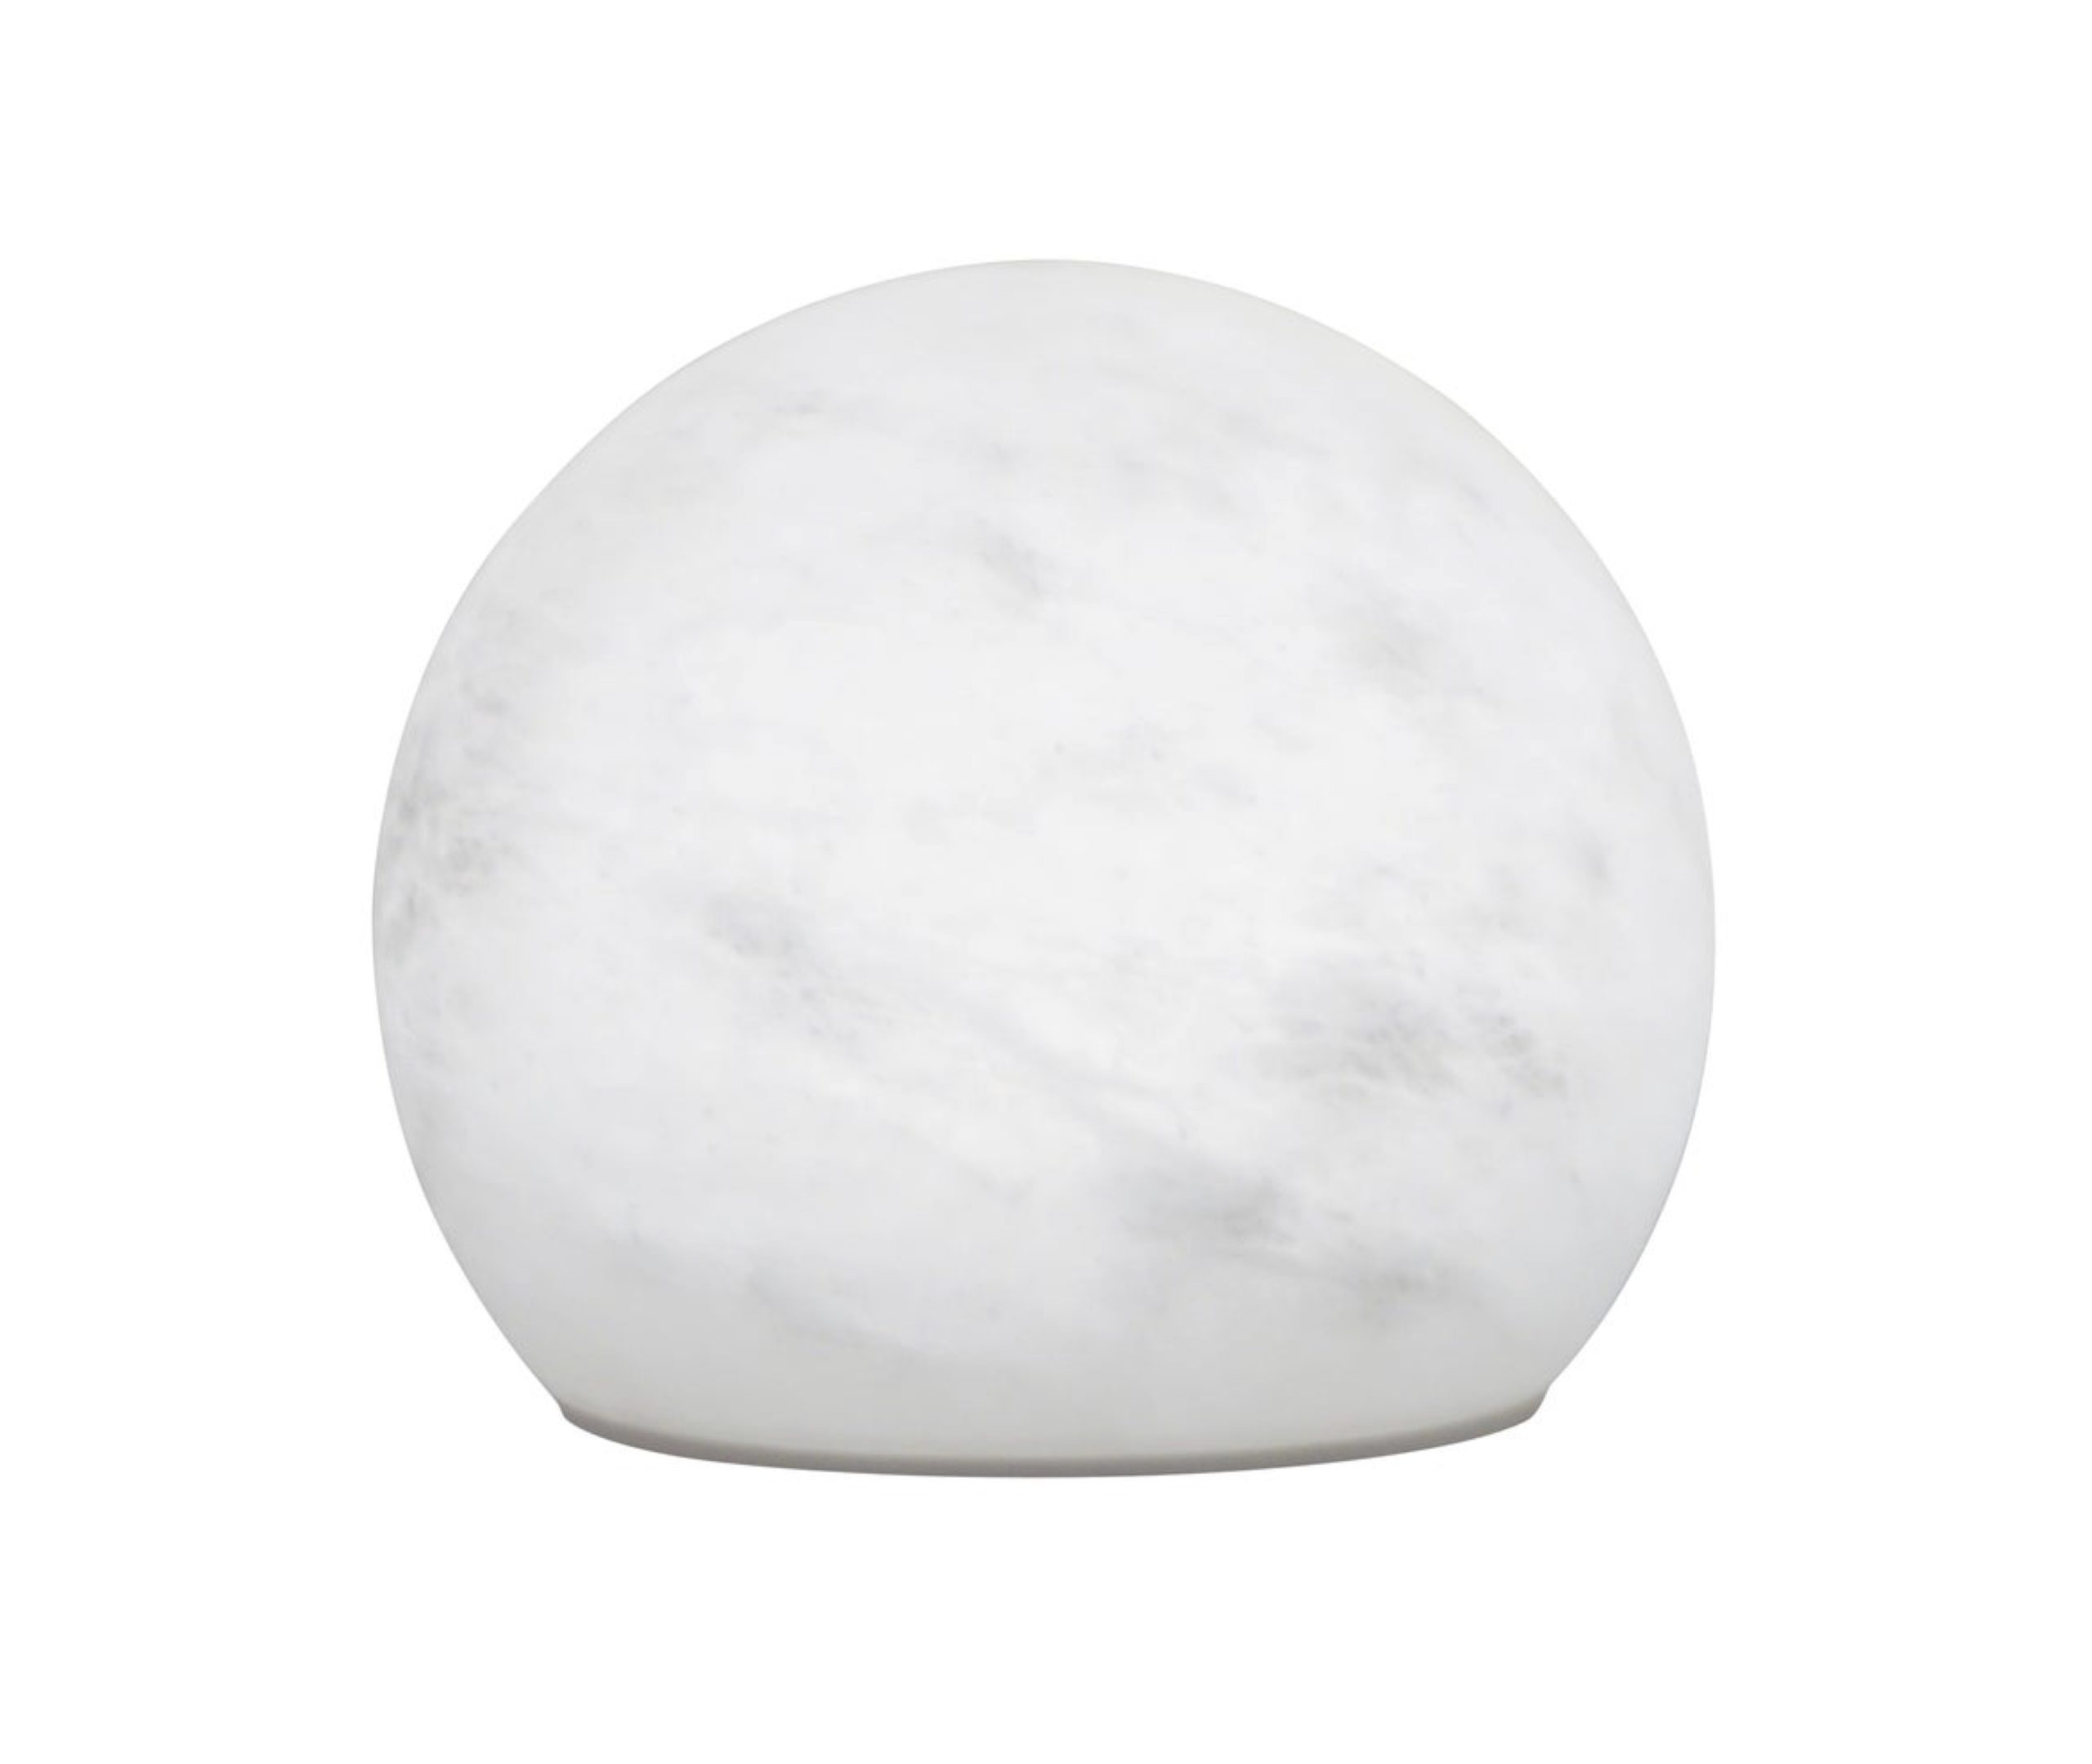 cosulich_interiors_and_antiques_products_new_york_design_Bespoke_Italian_Minimalist_White_Alabaster_Moon_Wireless_Round_Table_main-scaled-1